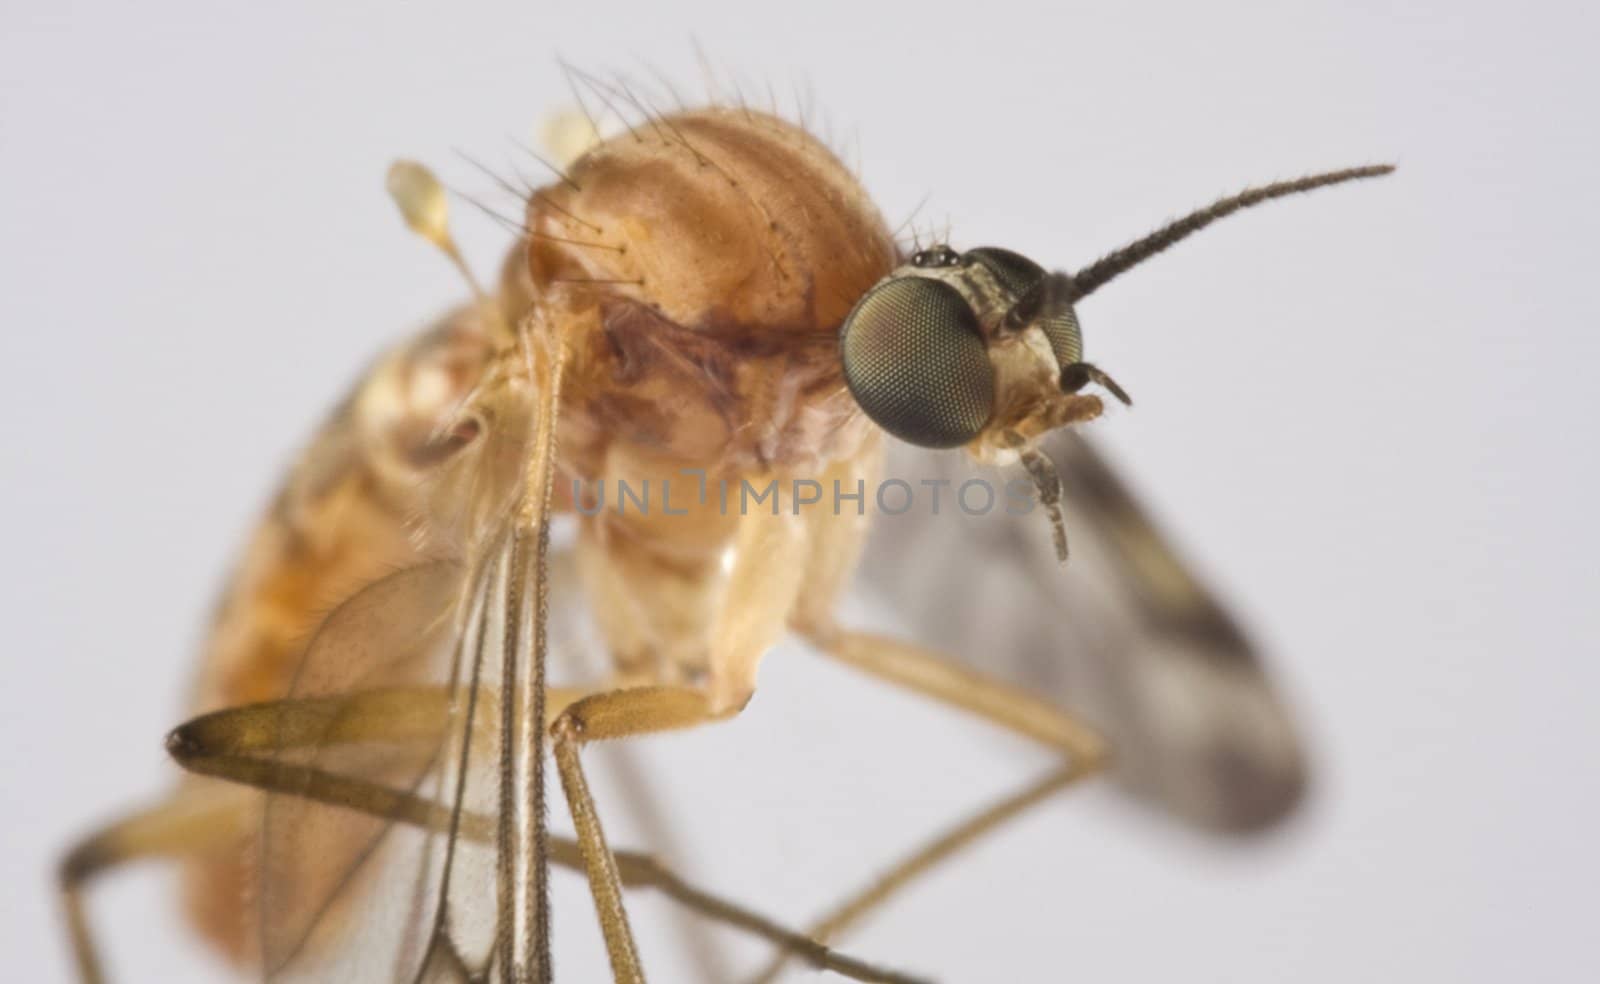 Sucking insect in close up with grey background